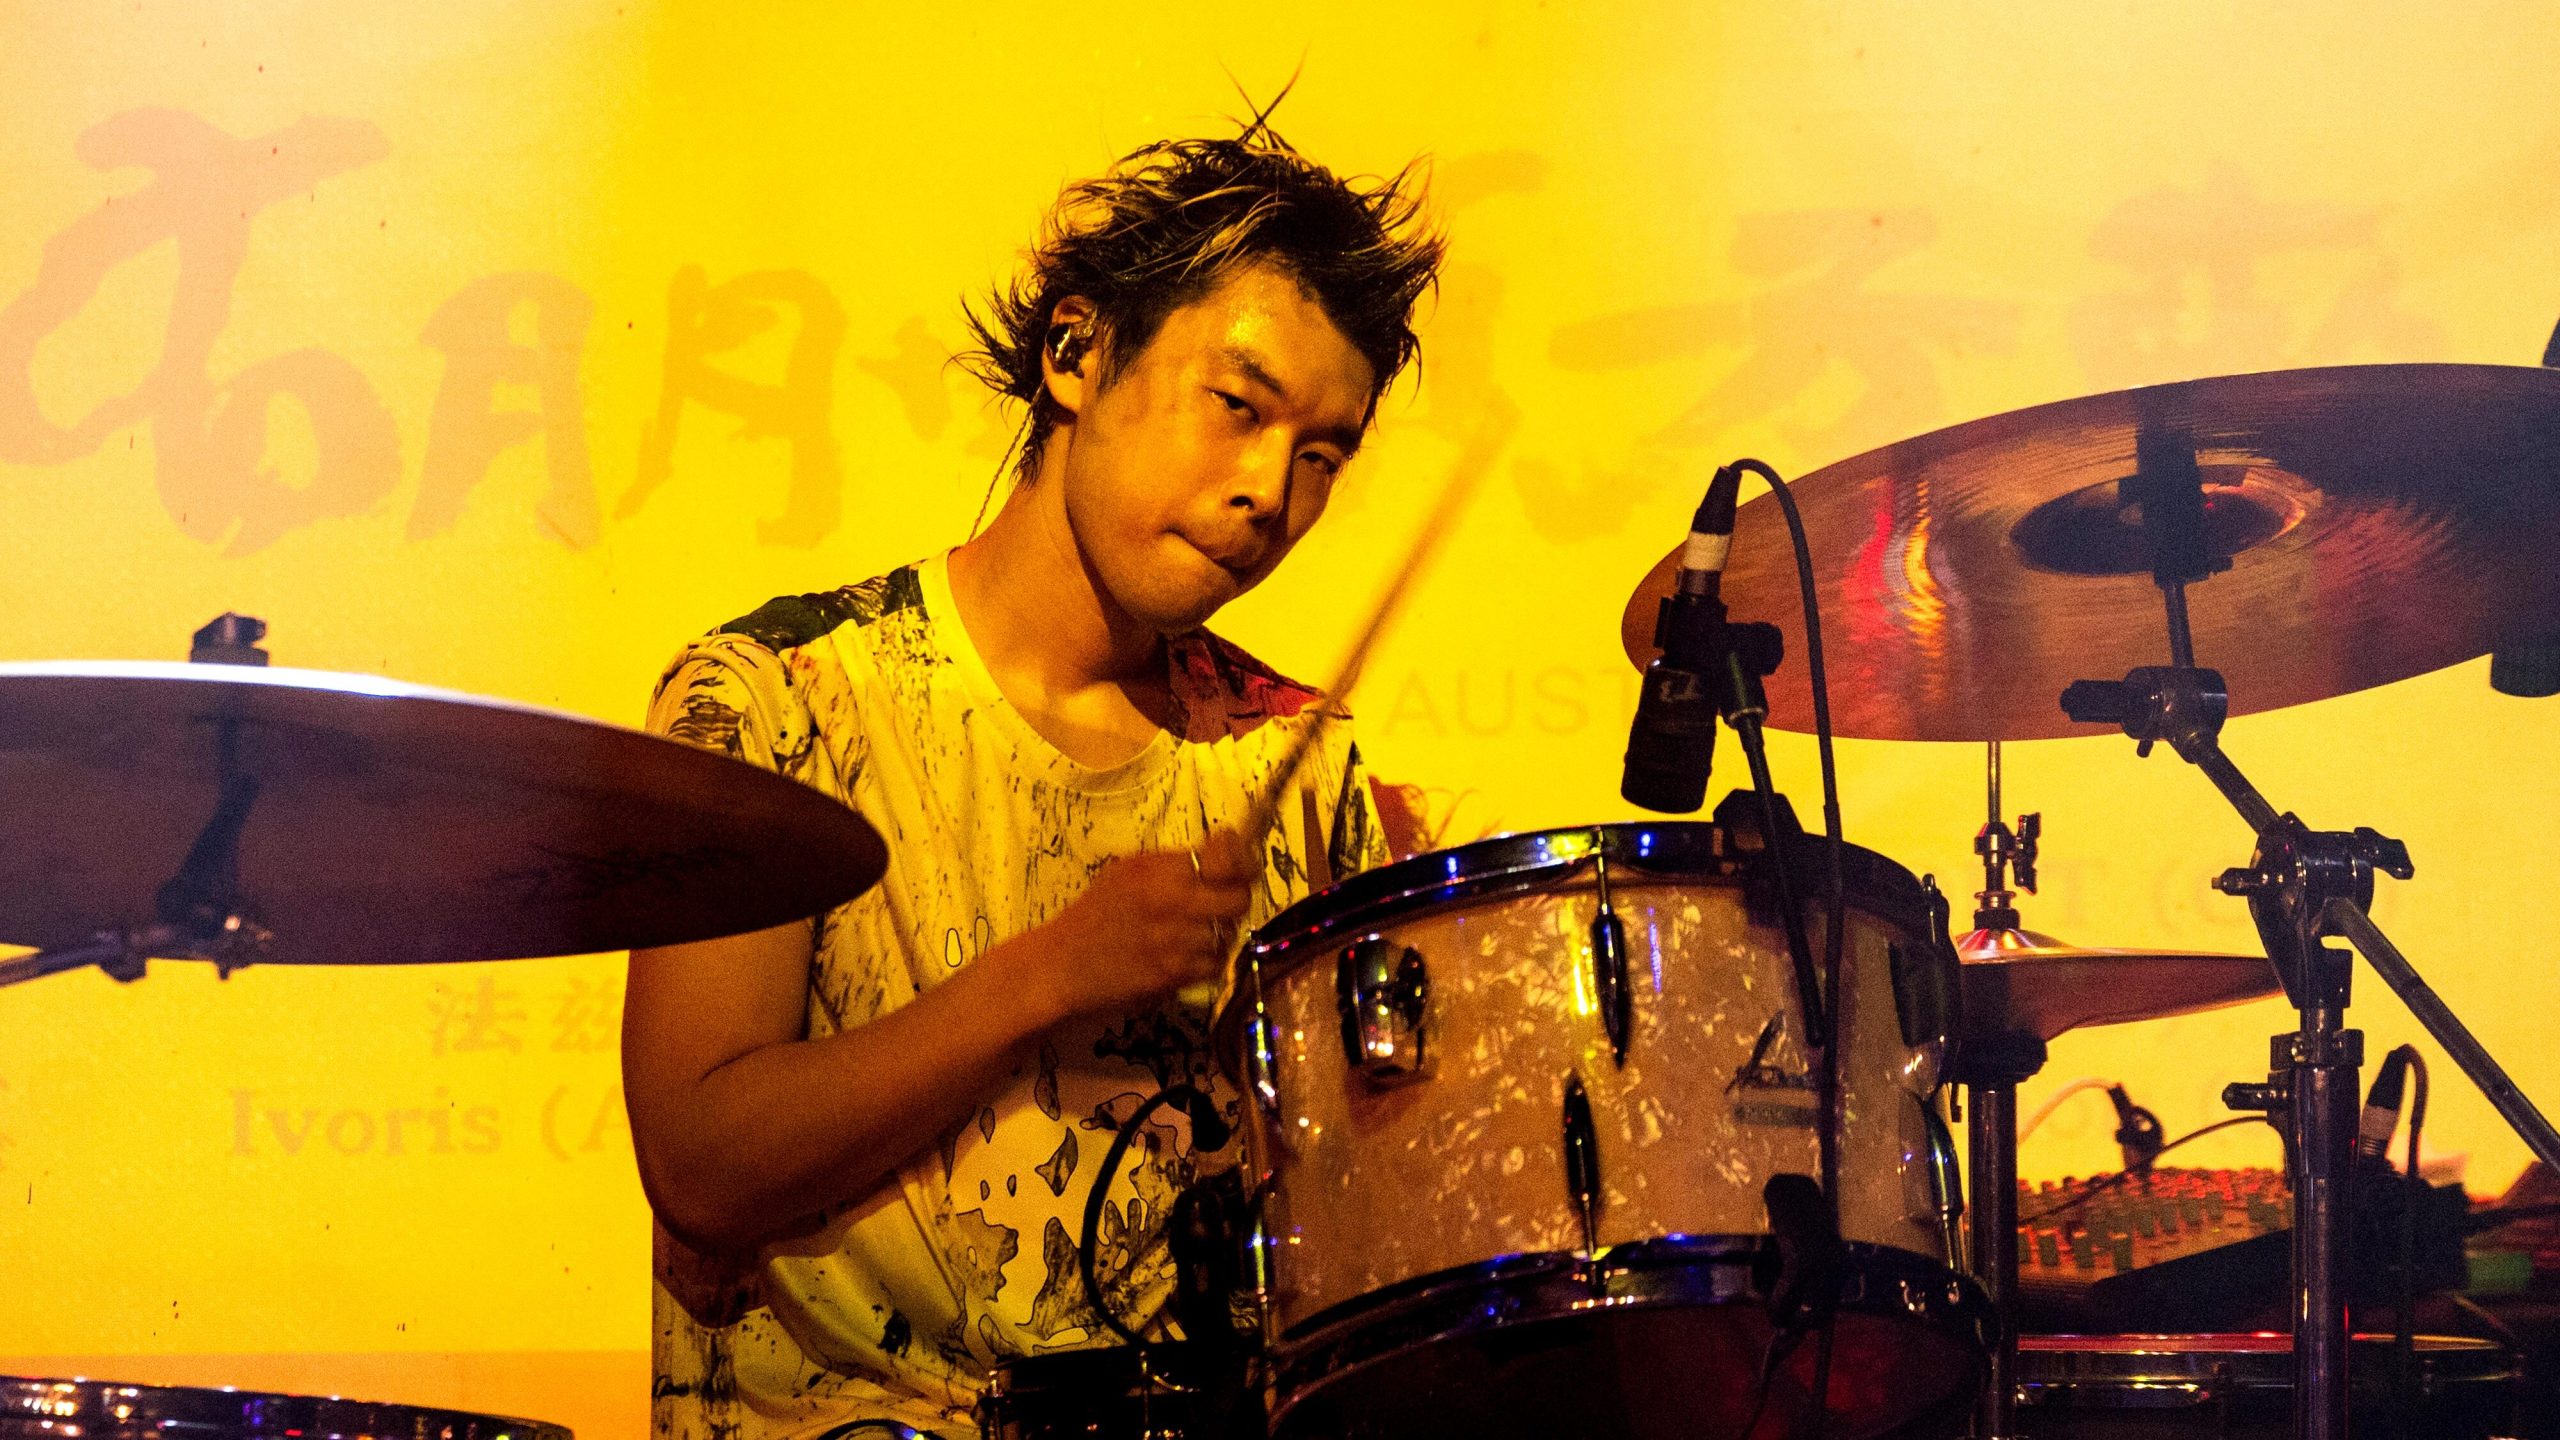 Drummer for Ako – Photo by Anthony Moreno